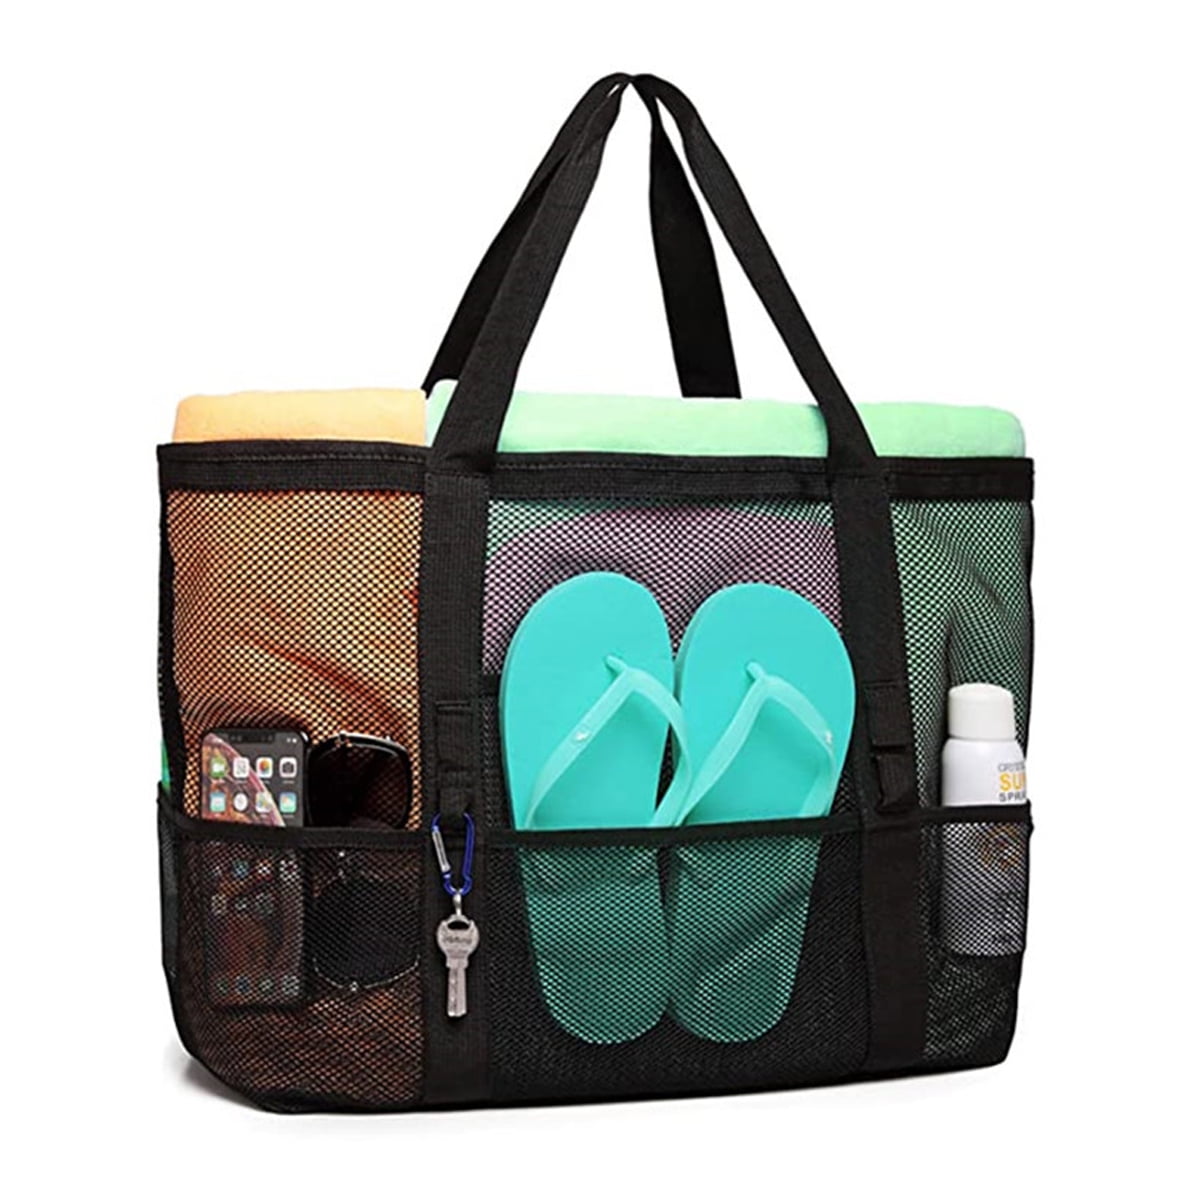 2CFun Beach Bag Large Beach Tote Bag with Zipper and Multiple Pockets ...